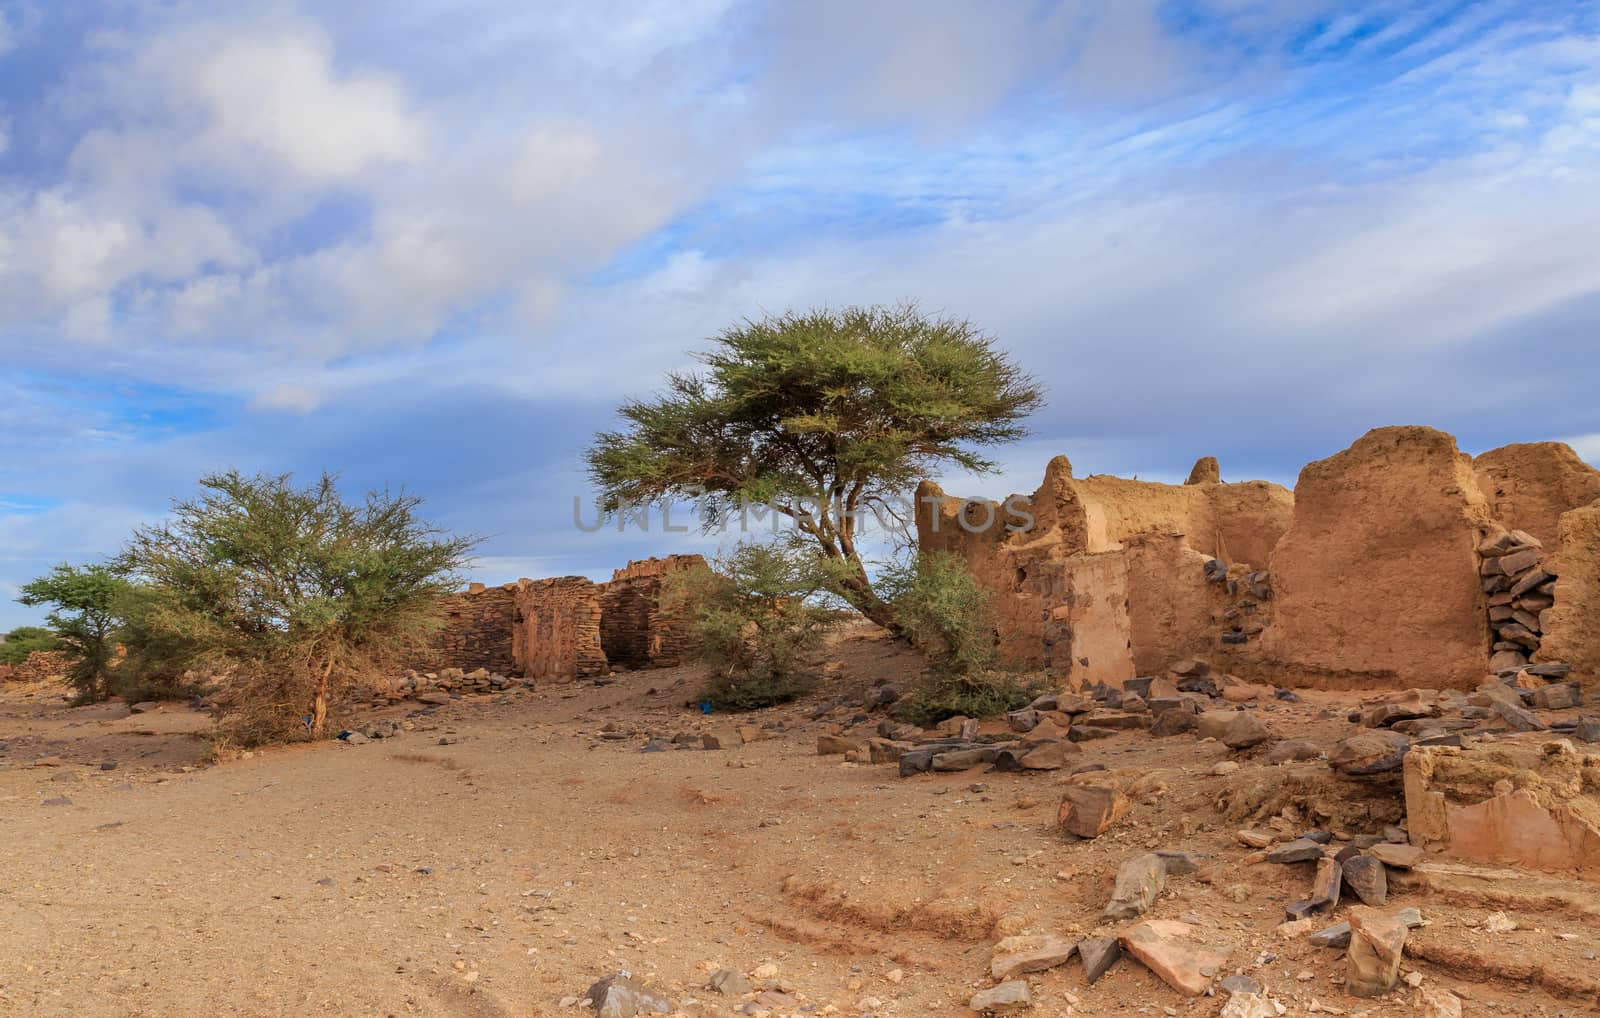 ruins of the ancient town in the Sahara desert, Morocco